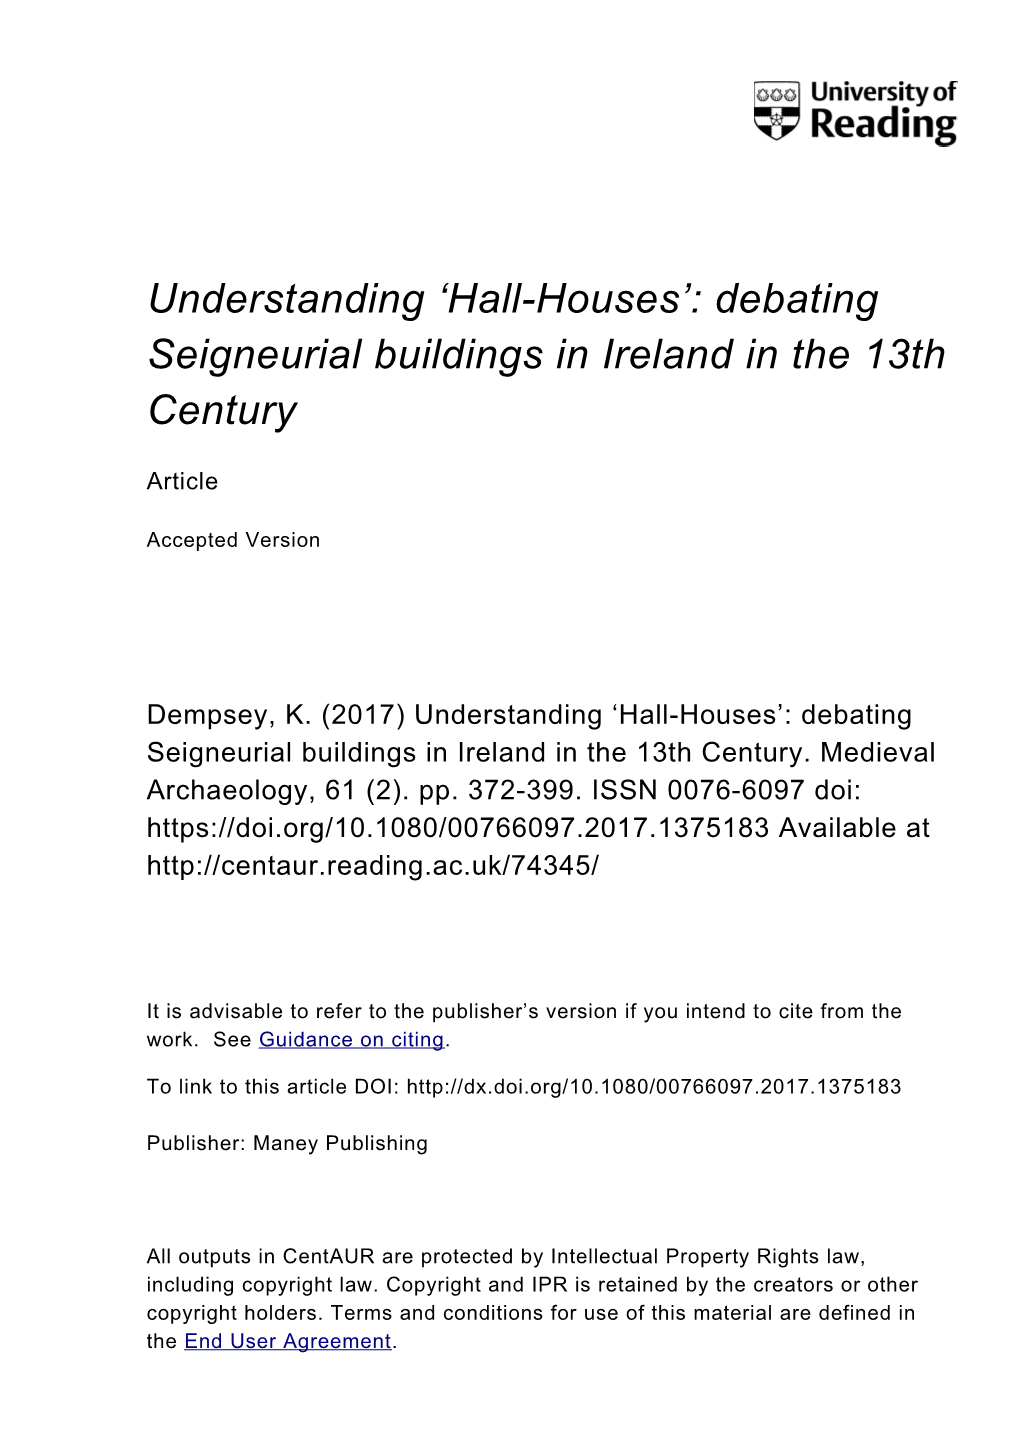 Hall-Houses’: Debating Seigneurial Buildings in Ireland in the 13Th Century